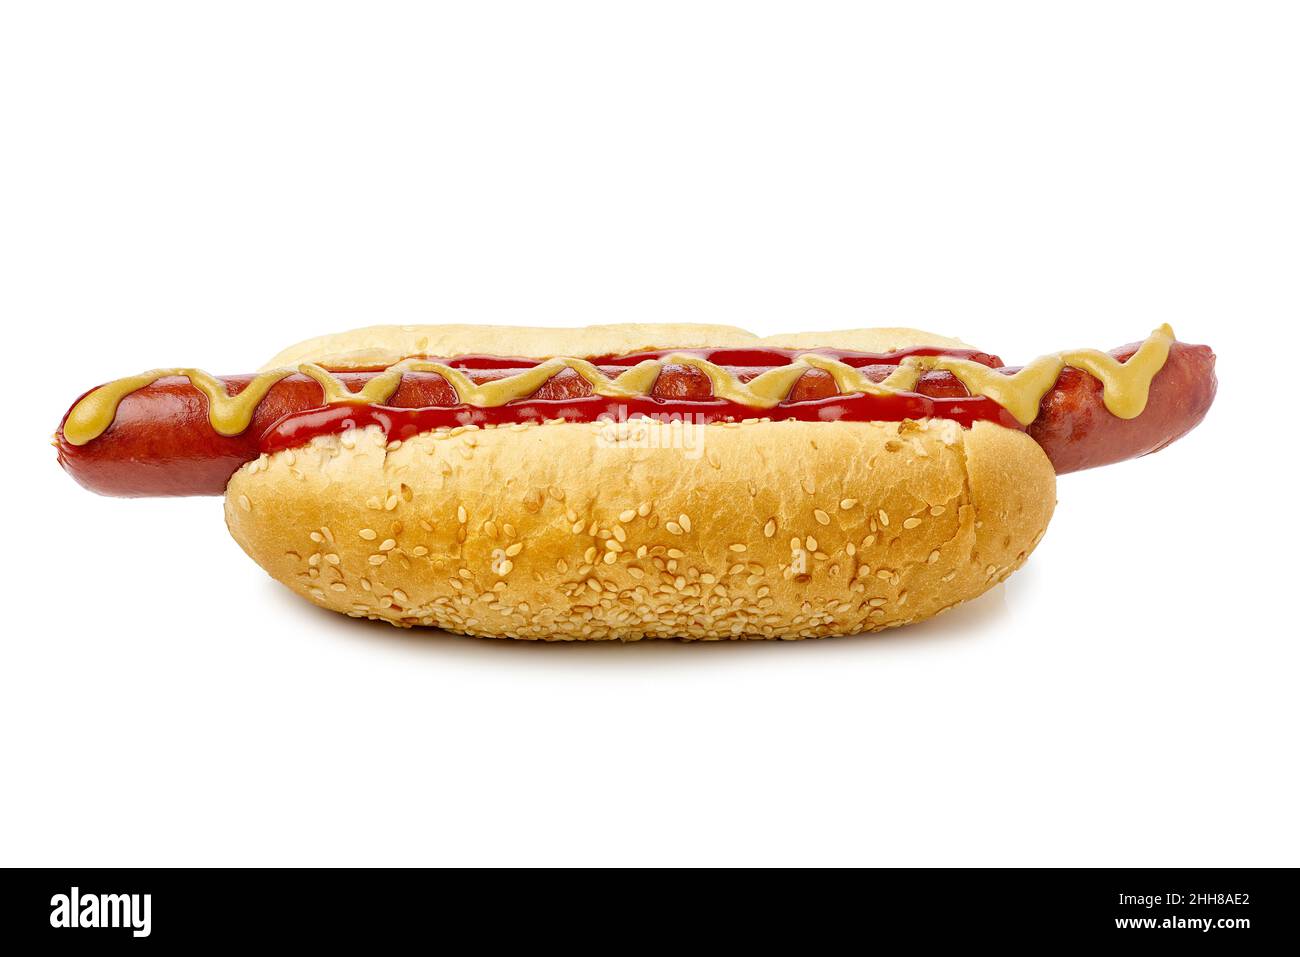 Hot Dog with huge sausage mustard and ketchup on white background Stock Photo